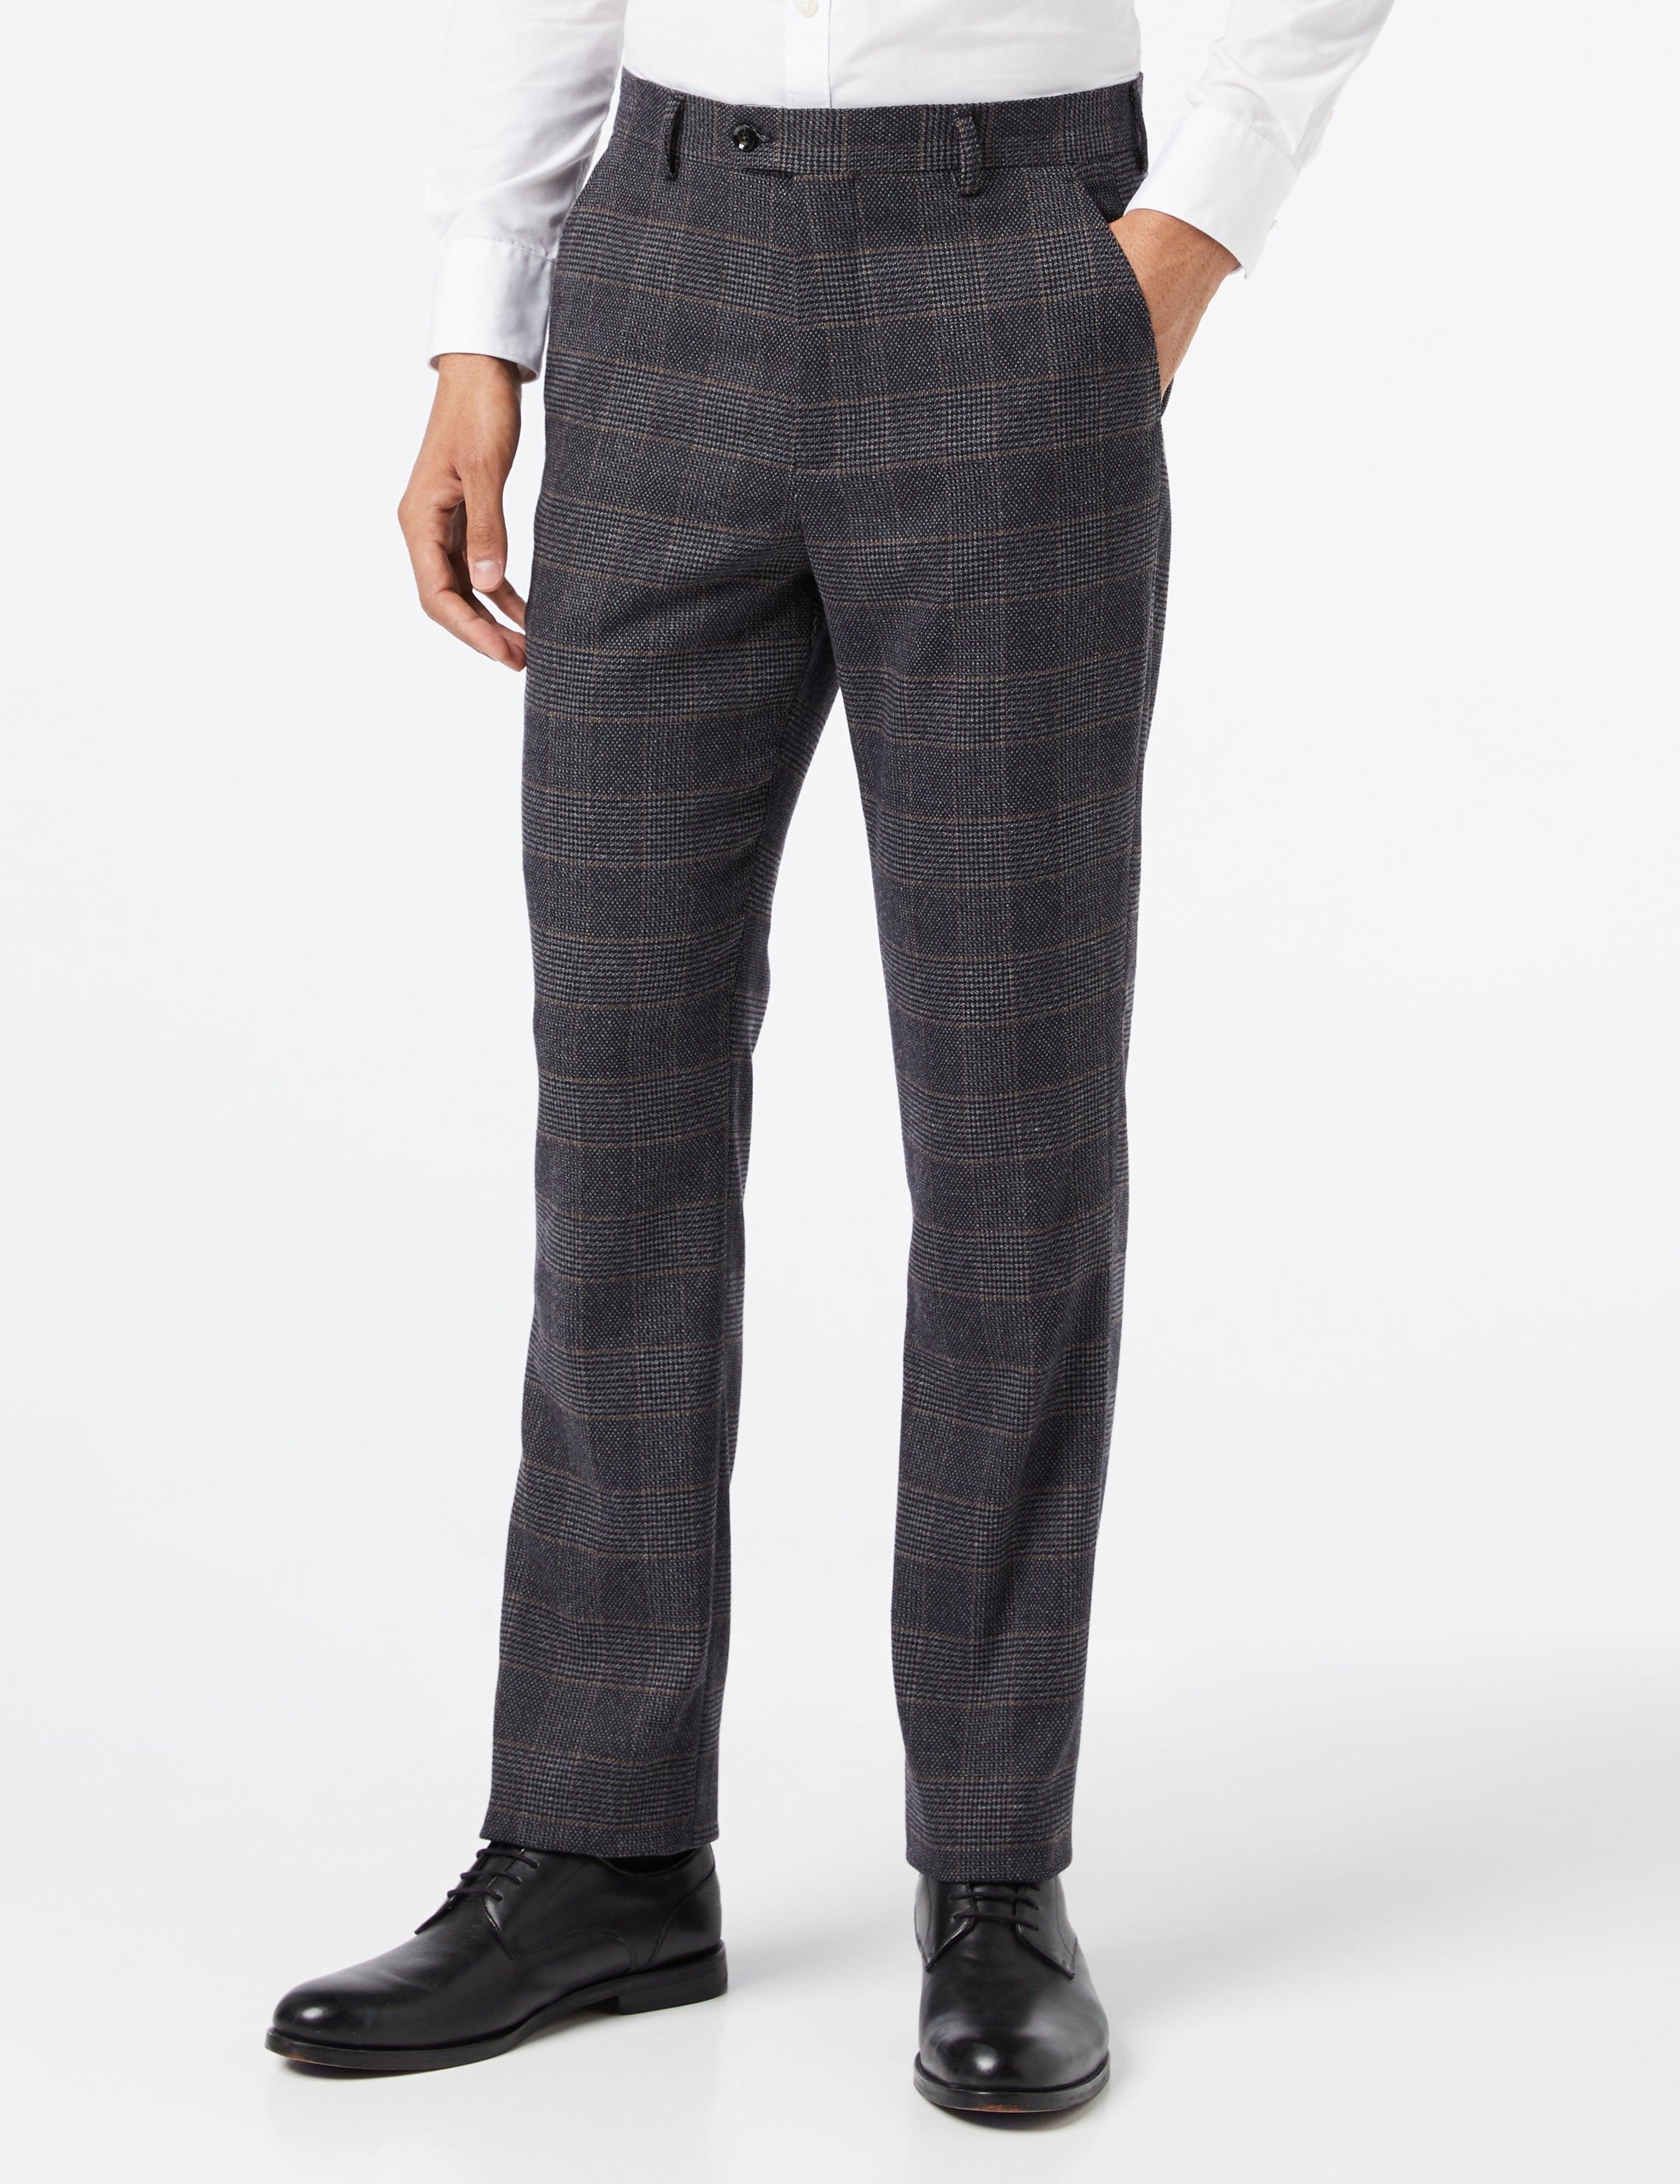 ETHAN - GREY TWEED CHECK SUIT